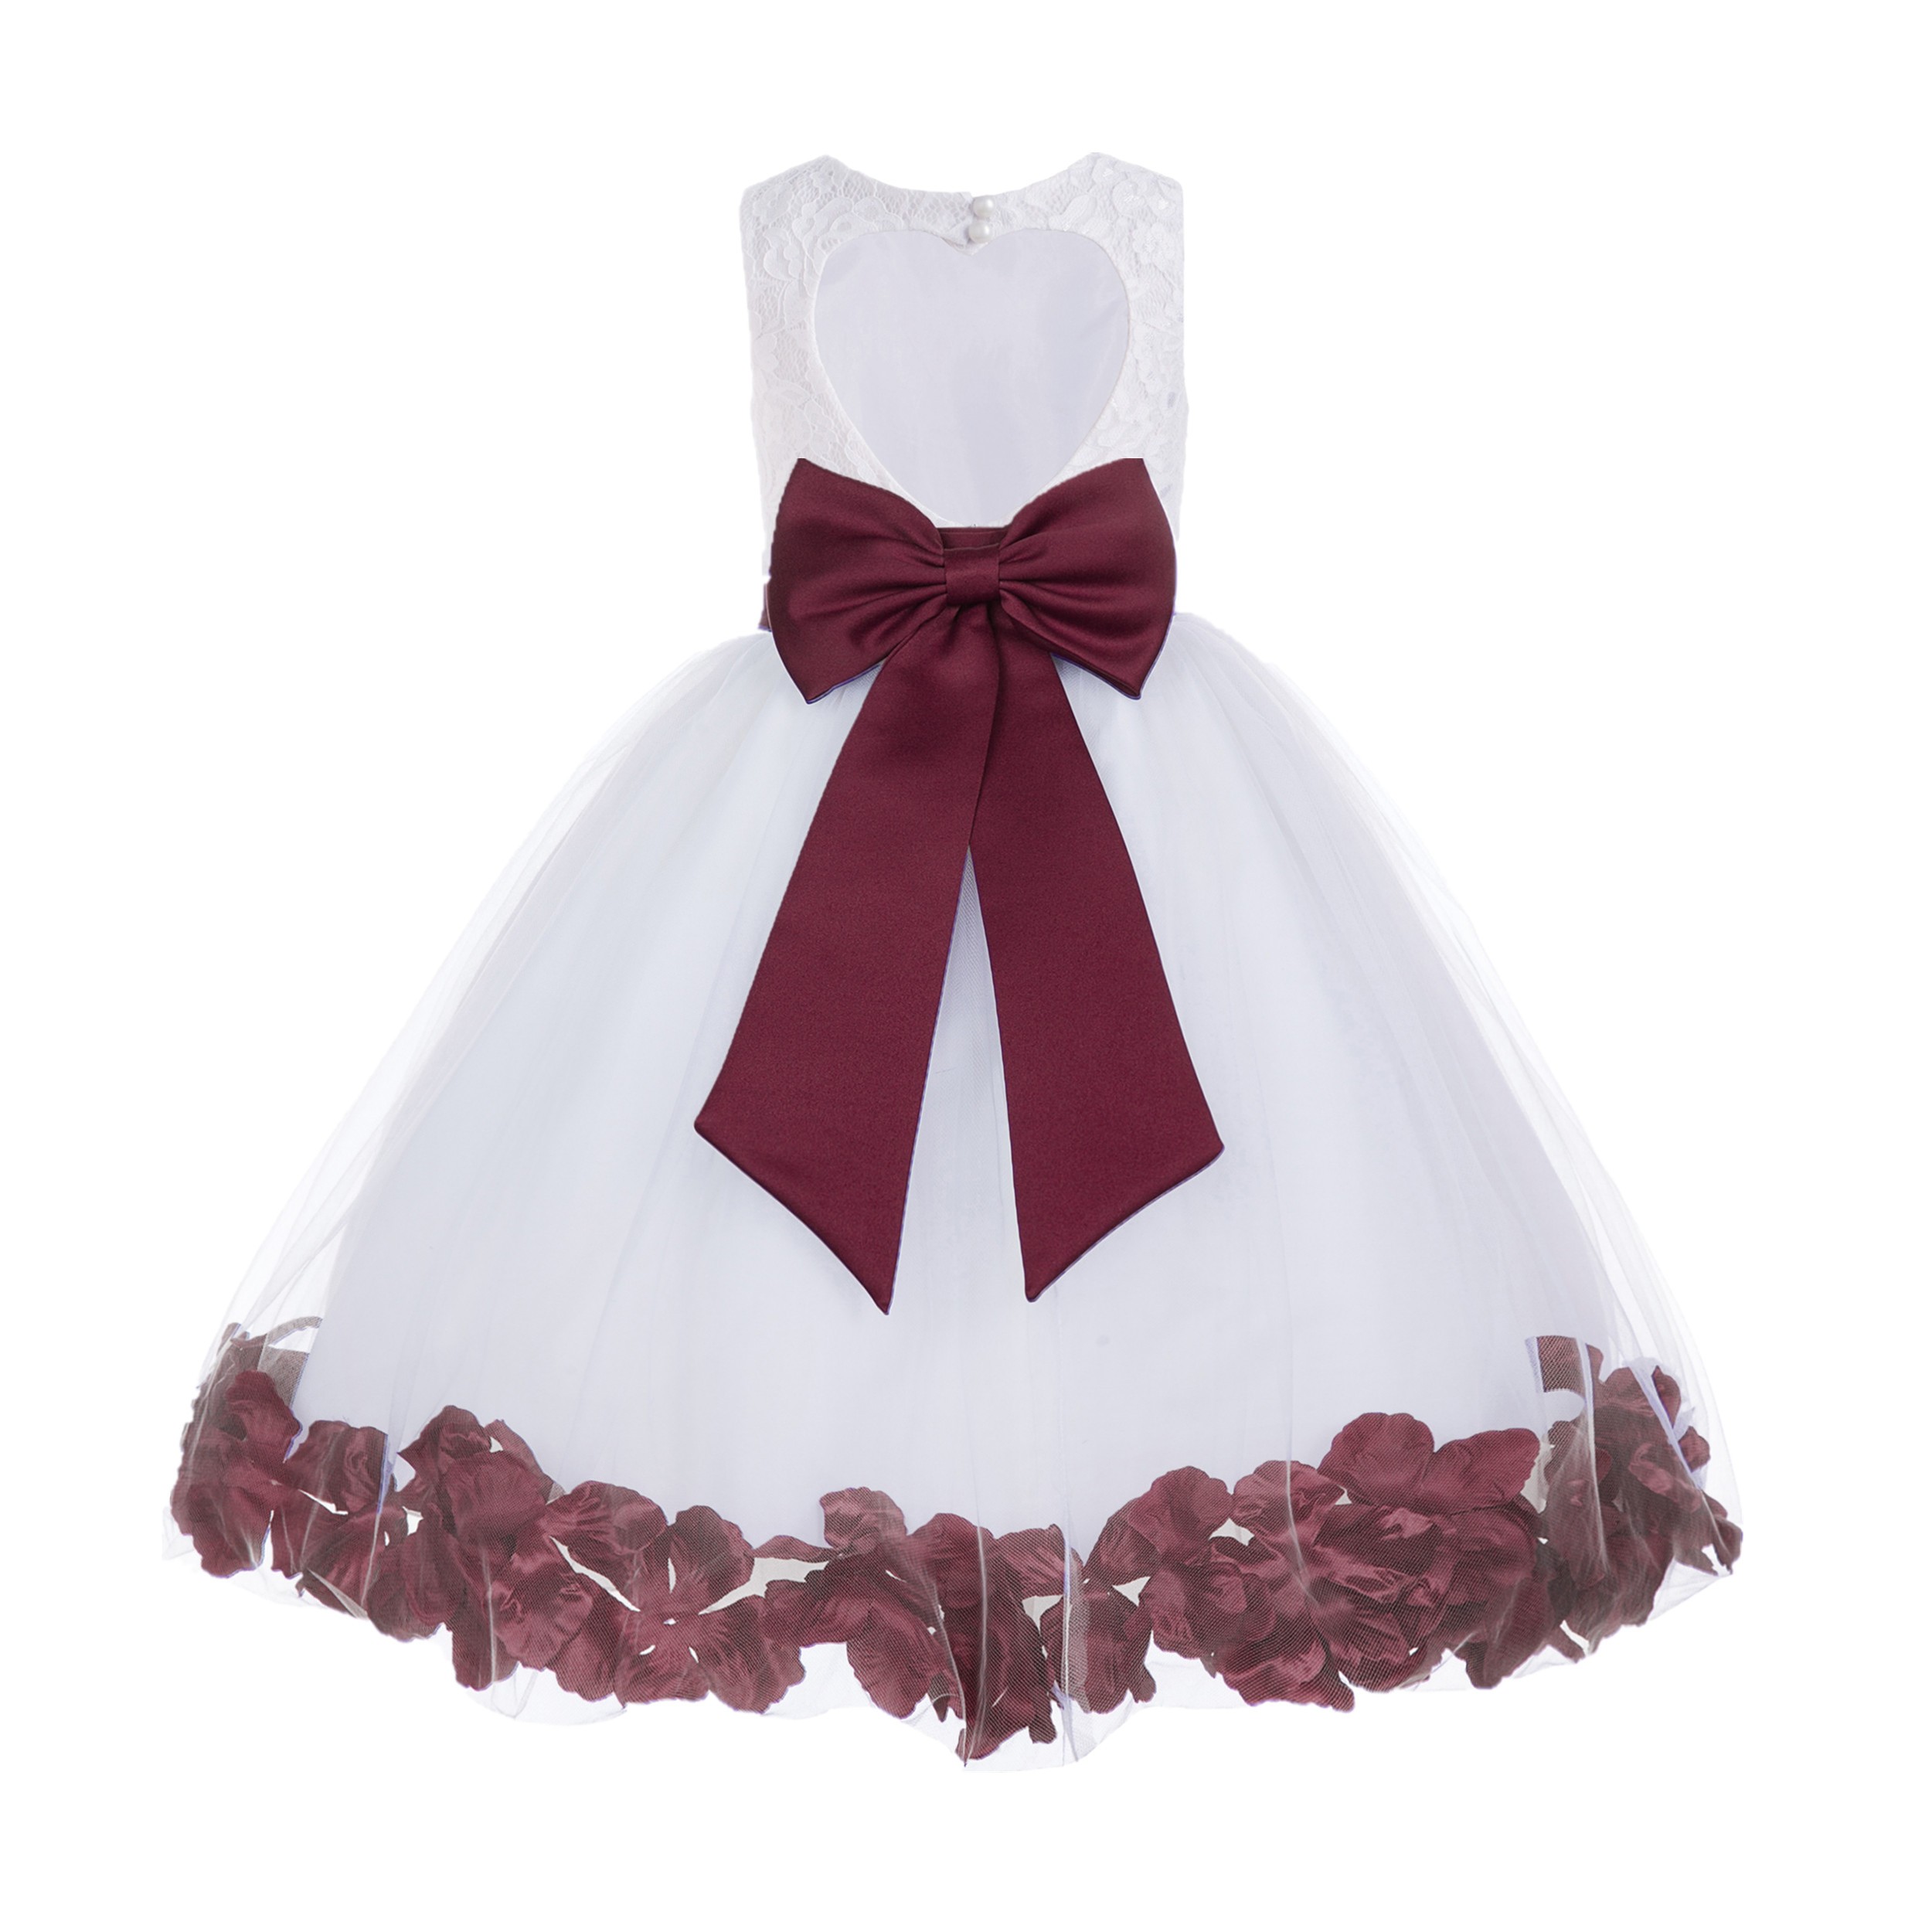 White / Burgundy Floral Lace Heart Cutout Flower Girl Dress with Petals 185T